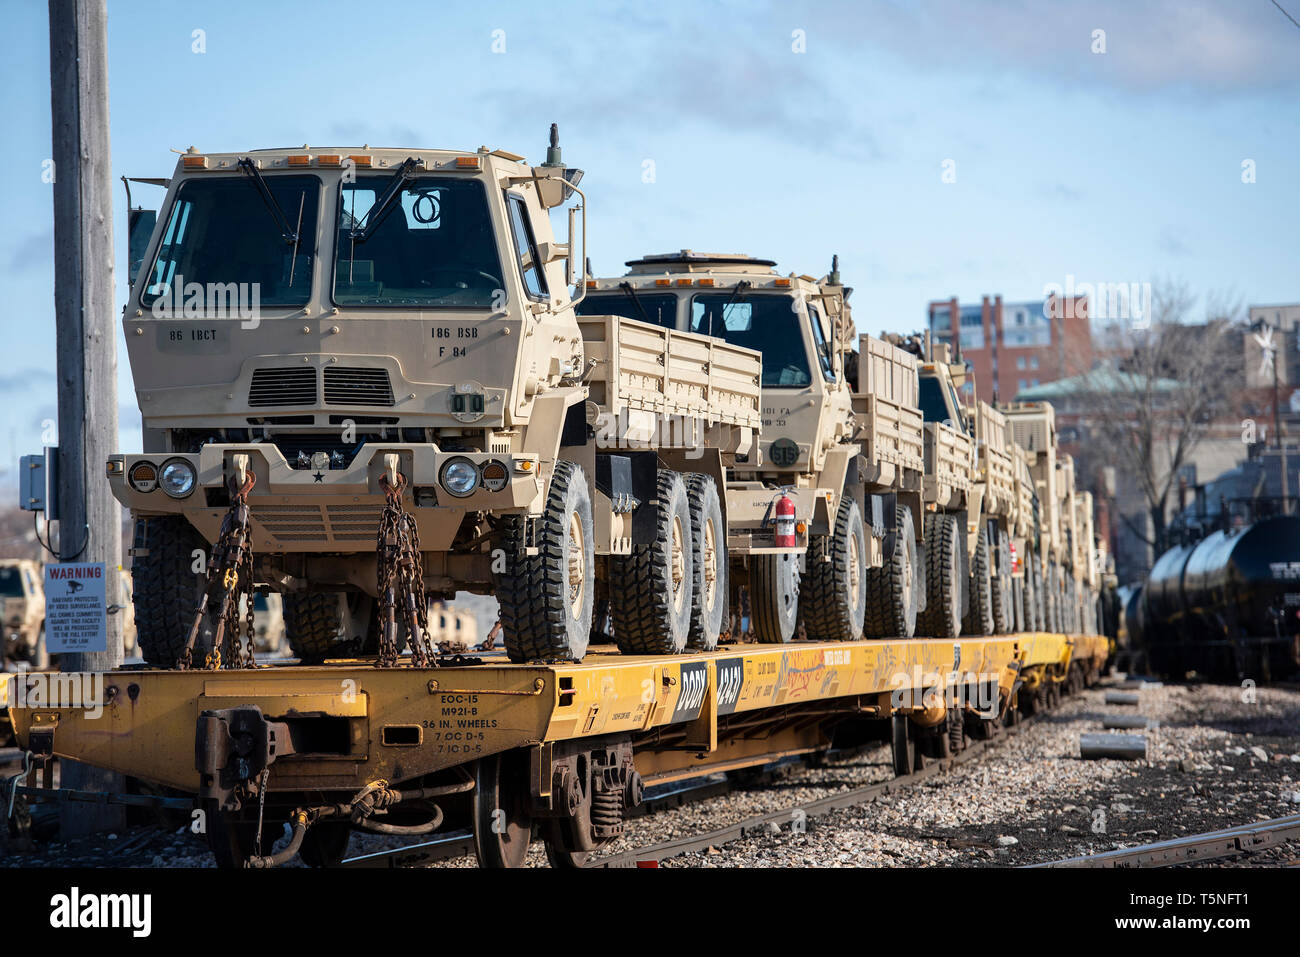 U.S. Army tactical vehicles assigned to the 86th Infantry Brigade Combat Team (Mountain), awaits transport after being loaded onto rail cars in Burlington, Vt., April 16, 2019. Soldiers from Vermont, Massachusetts and Connecticut loaded and over 600 vehicles onto 210 rail cars to be transported to Fort Polk, Louisiana in preparation for a Joint Readiness Training Center rotation next month. (U.S. Air National Guard photo by Master Sgt. Sarah Mattison) Stock Photo